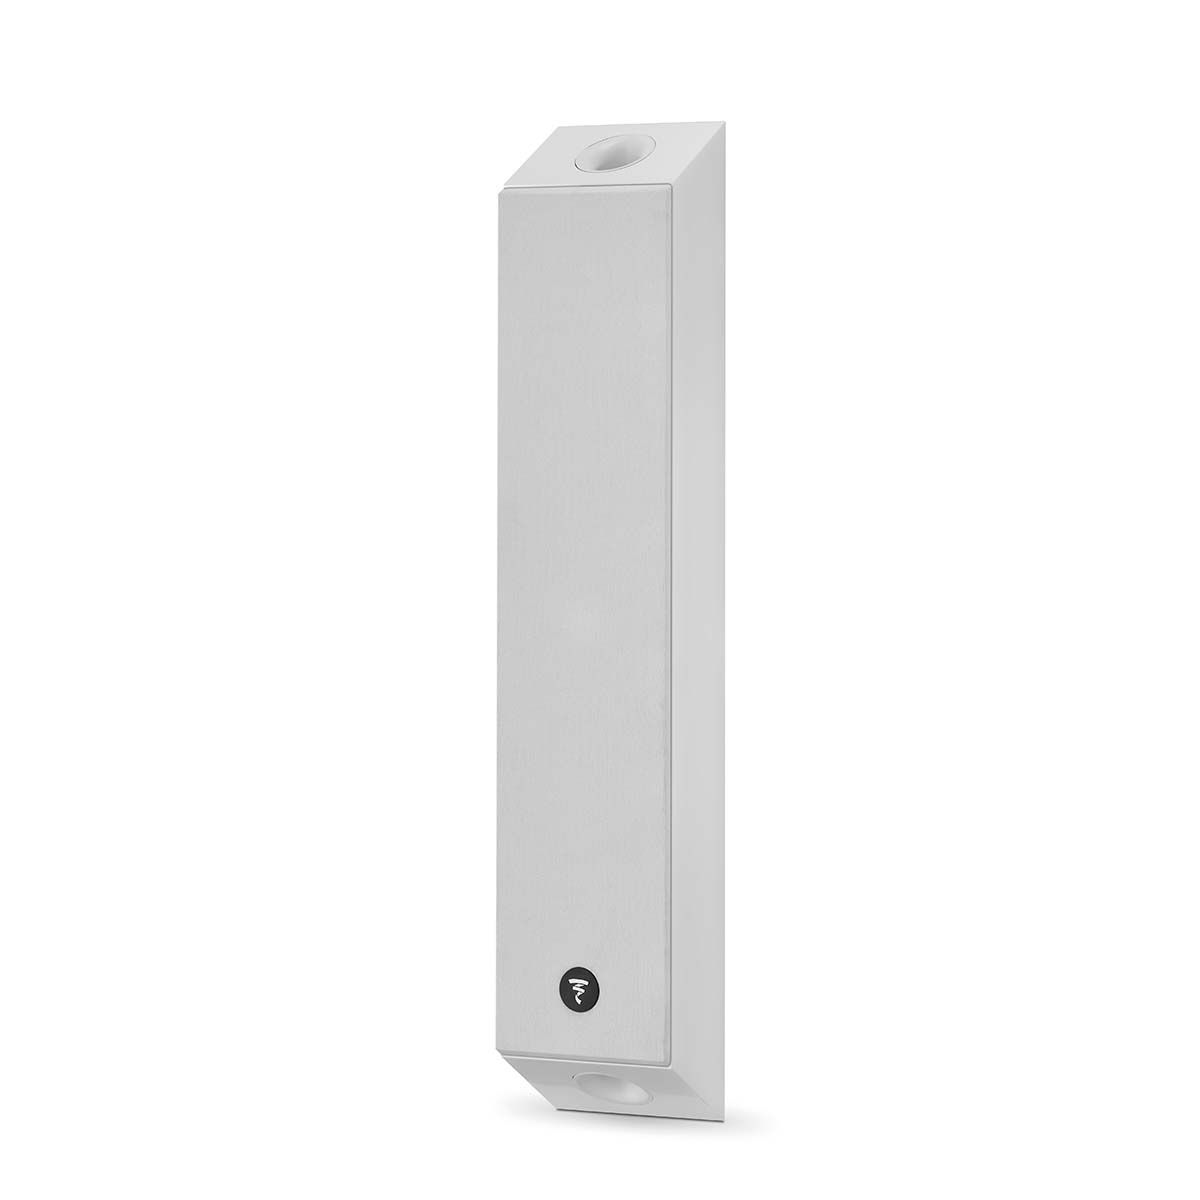 Focal On Wall 301 Speaker, Gloss White, vertical front angle with grille